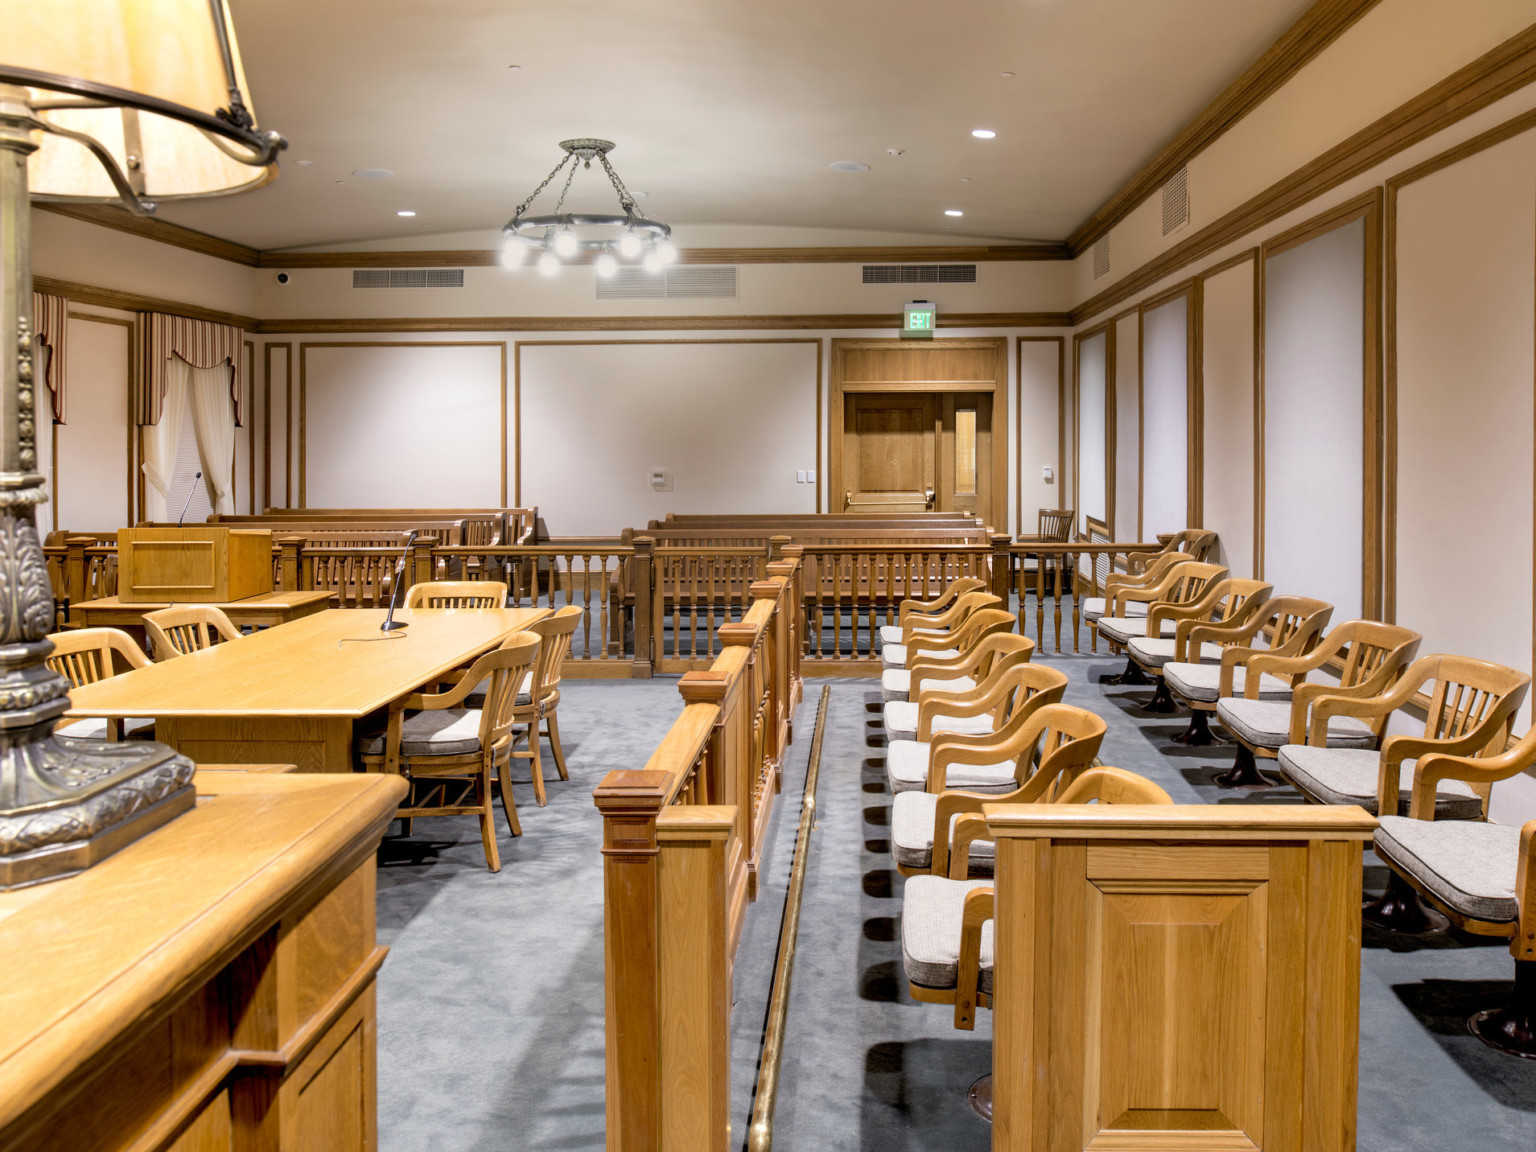 Courtroom with white walls, grey carpet and wood details. Carved bannisters separate jury box and public seating